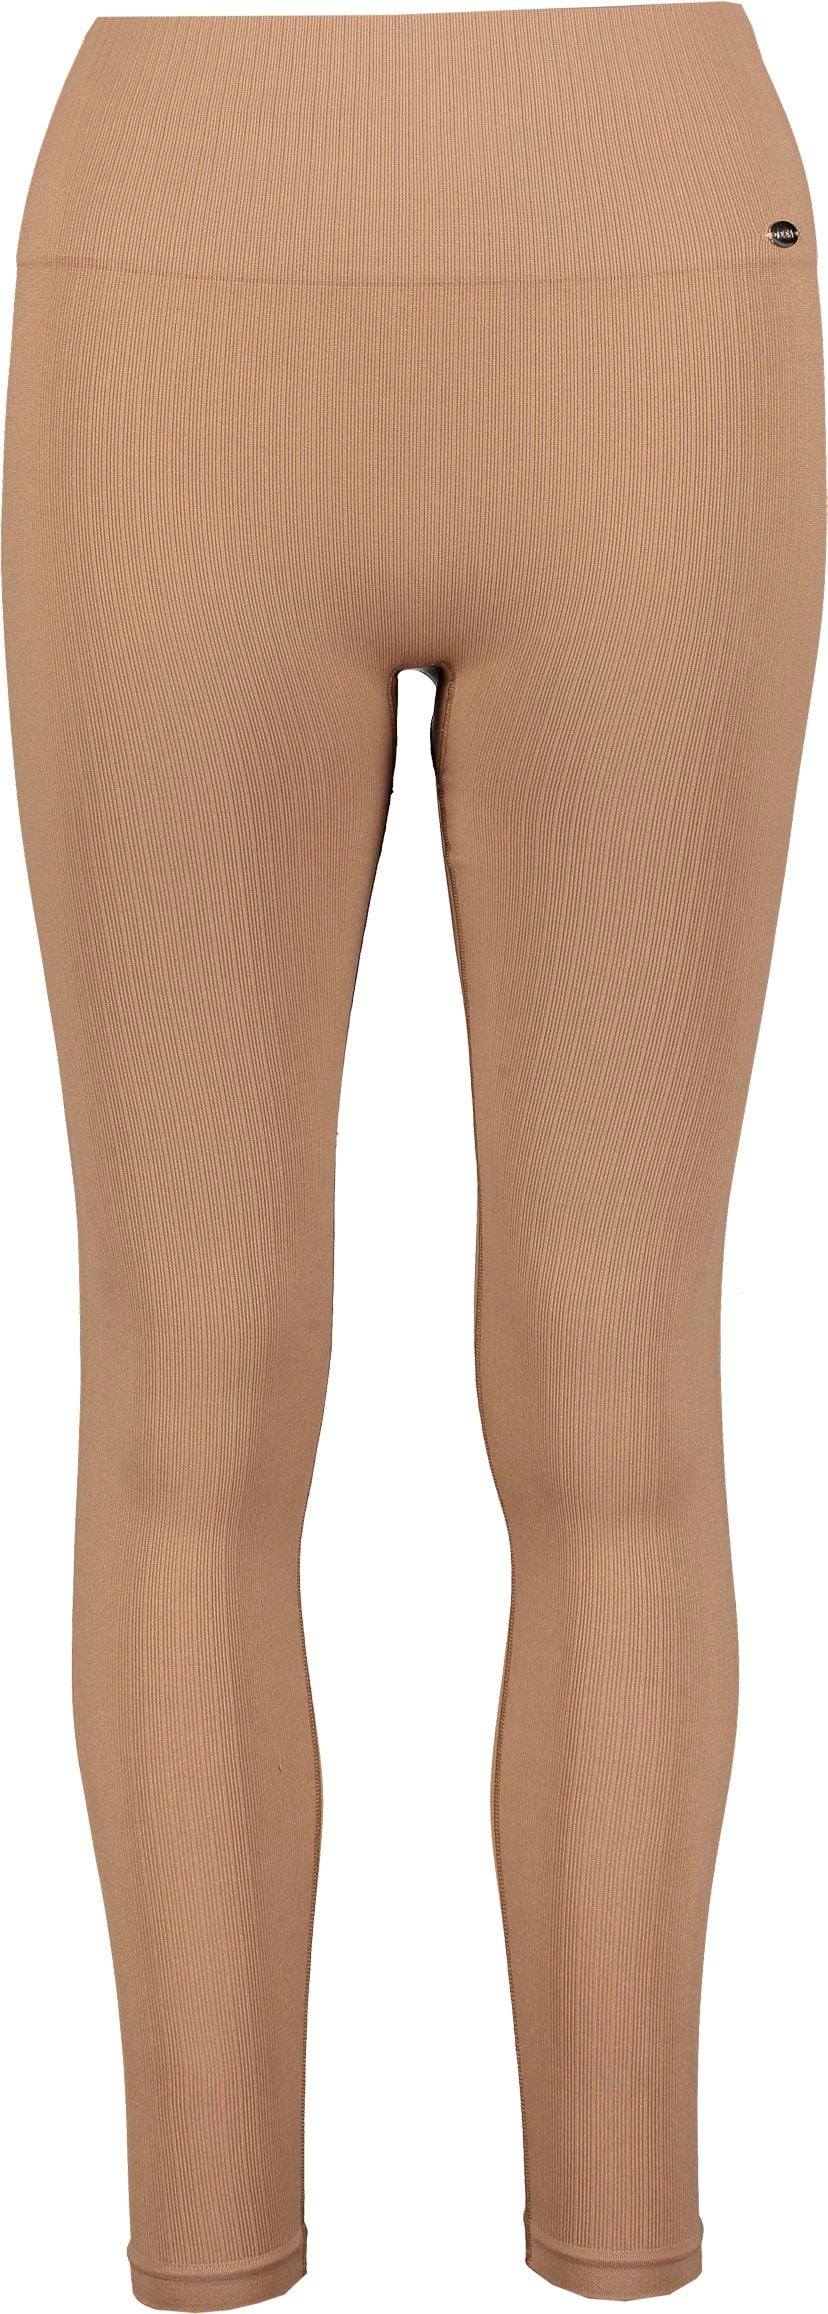 DROP OF MINDFULNESS, JEANE RIBBED SEAMLESS TIGHTS W